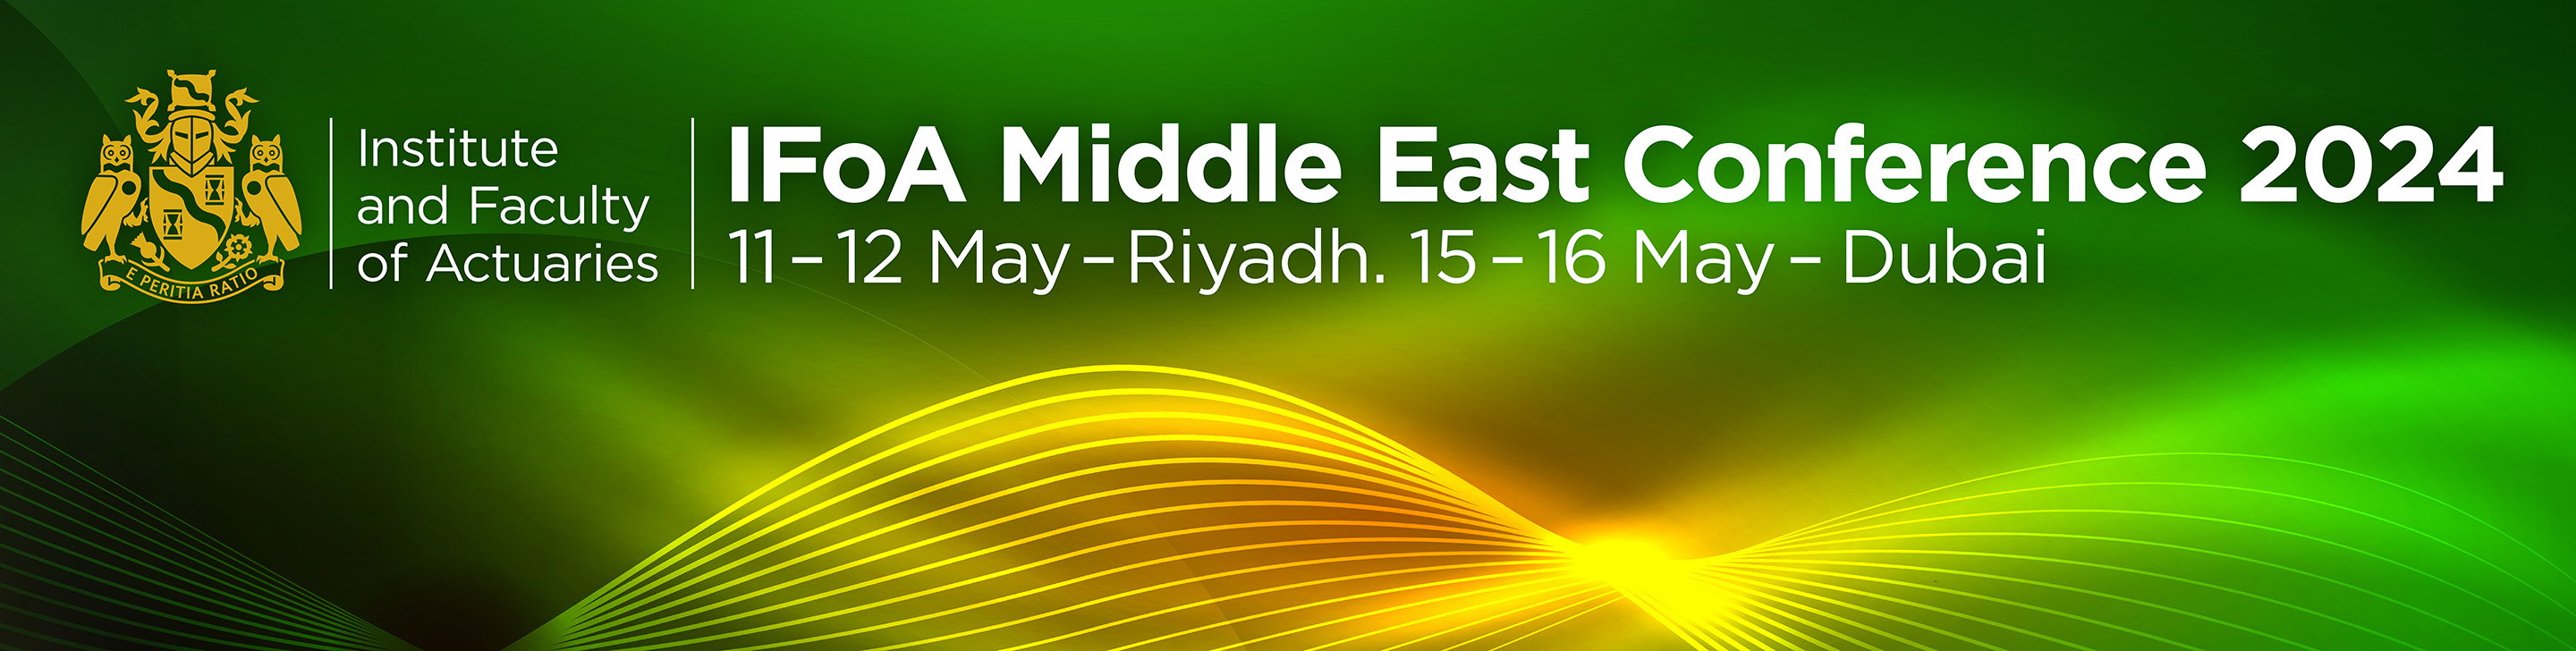 IFoA Middle East Conference 2024, 11 to 12 May Riyadh, 15 to 16 May Dubai